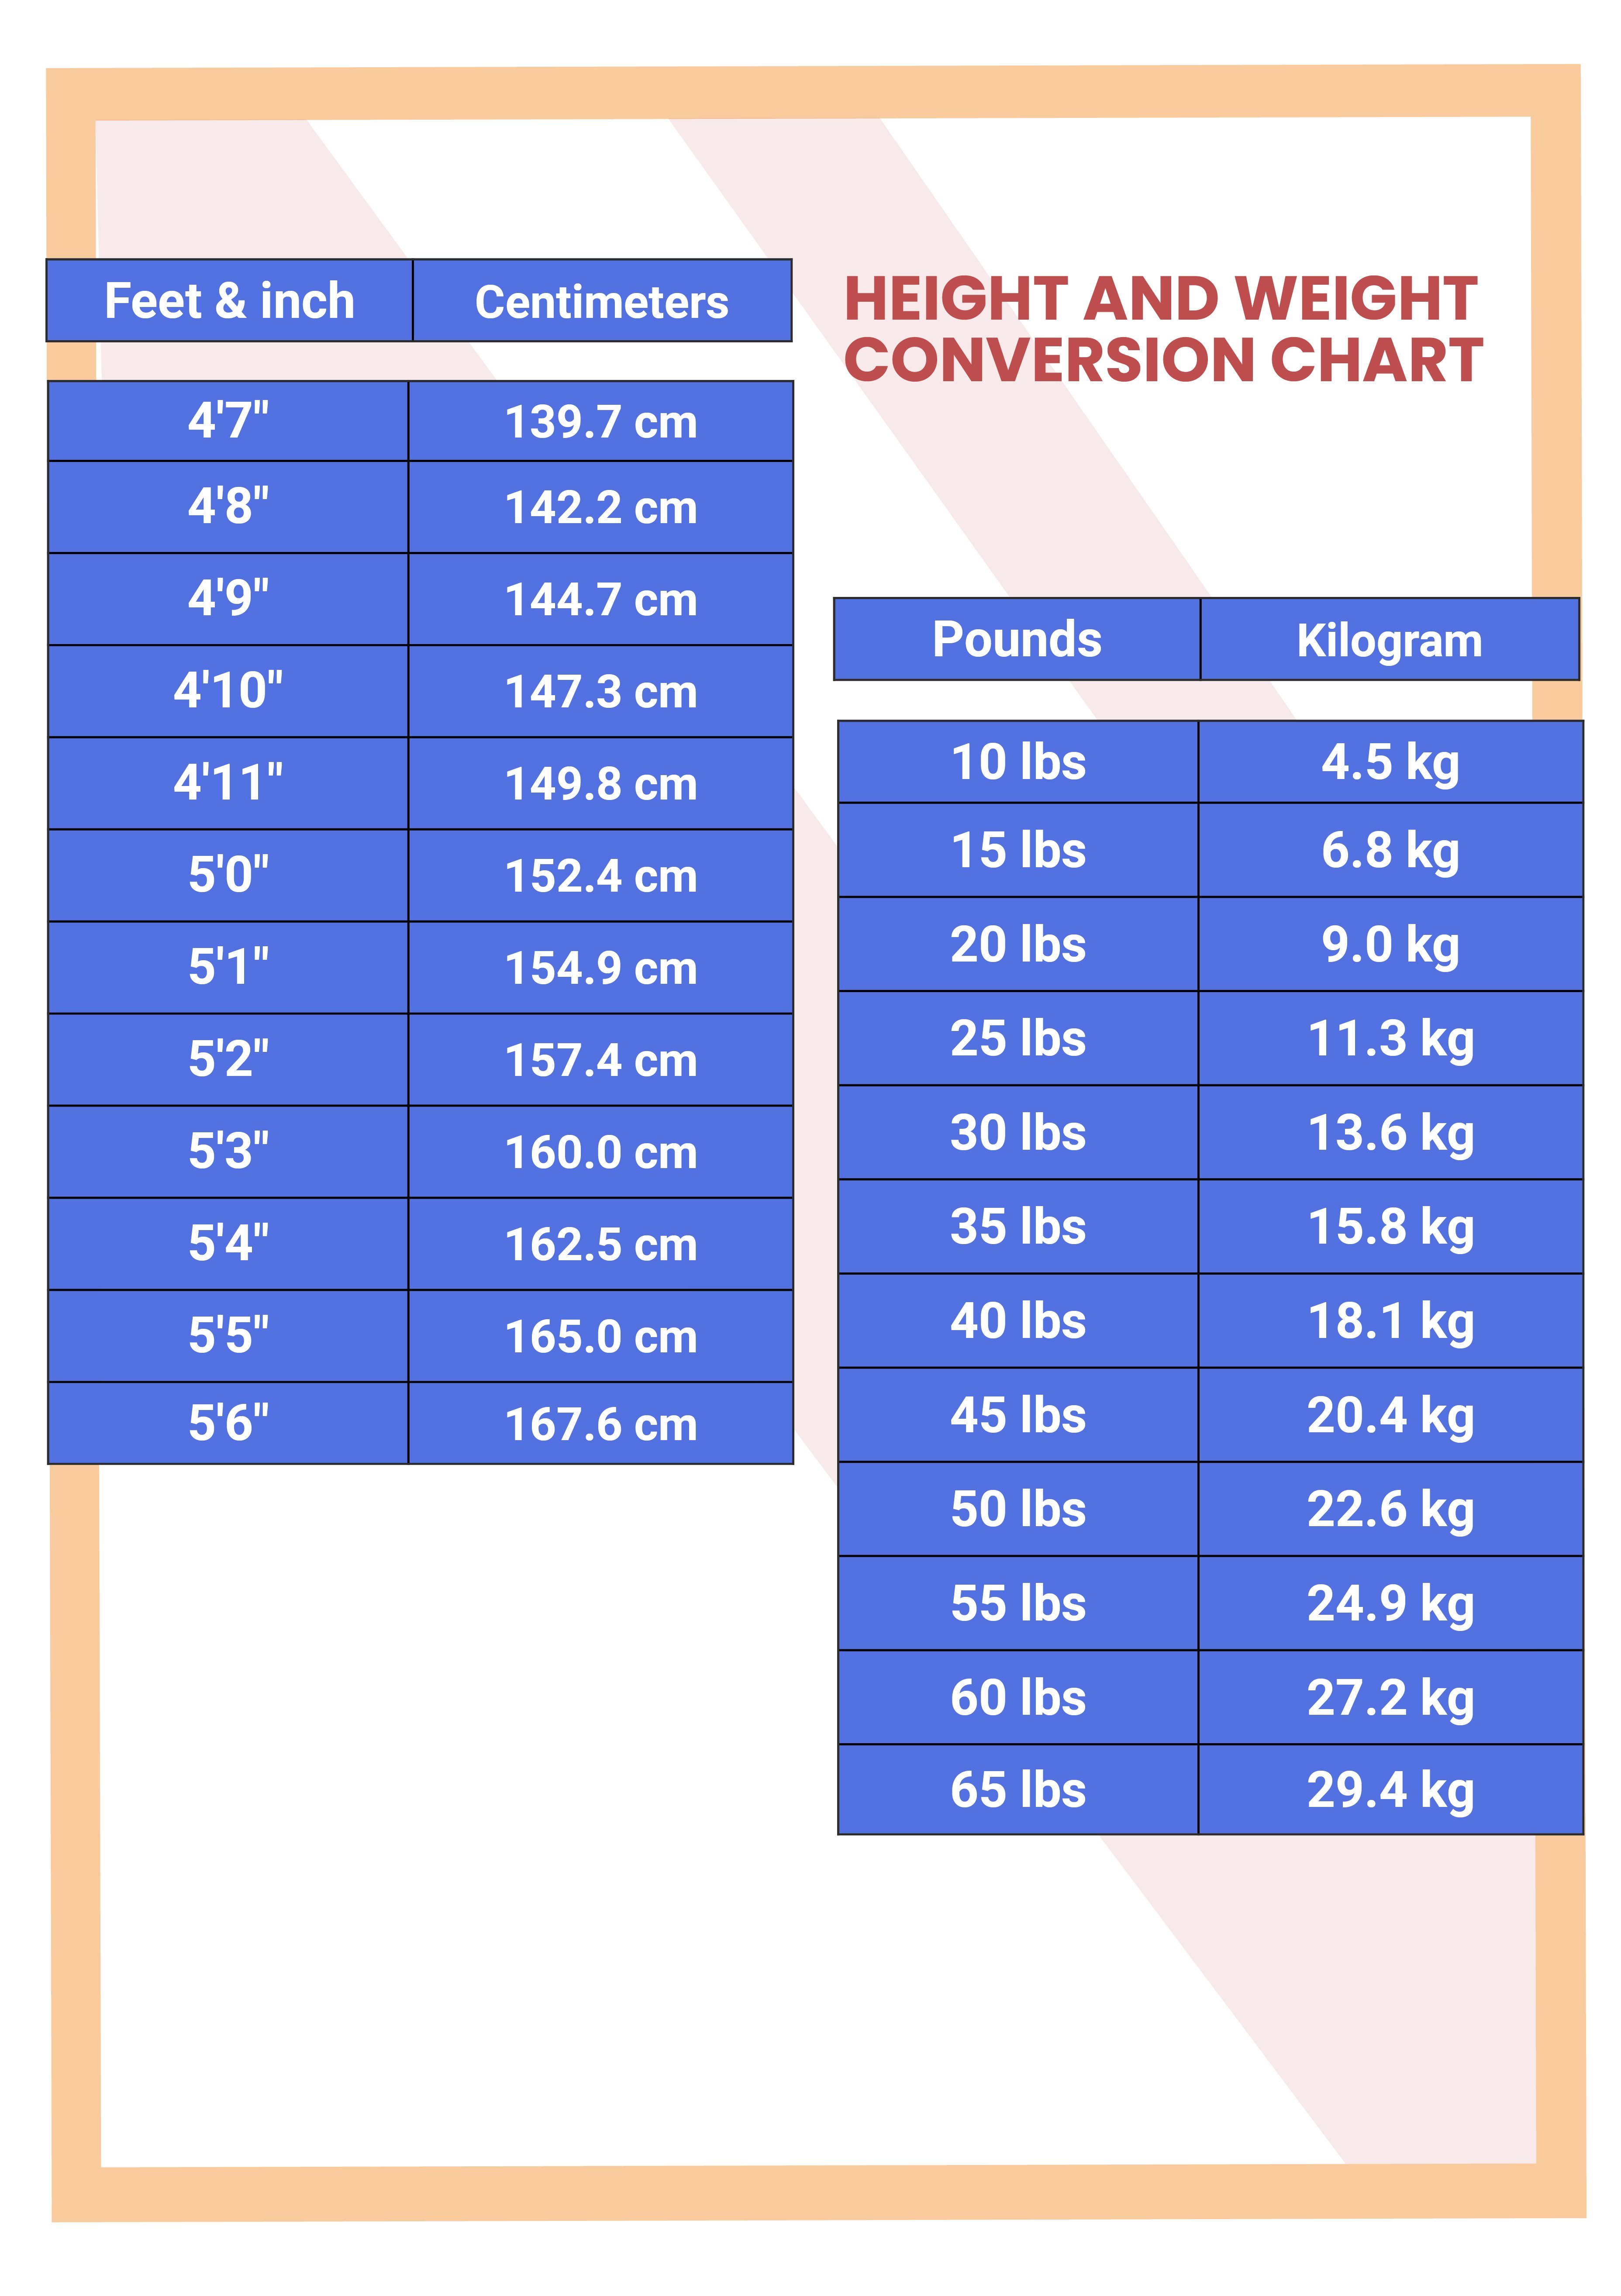 Free Height Conversion Chart - Download in PDF | Template.net